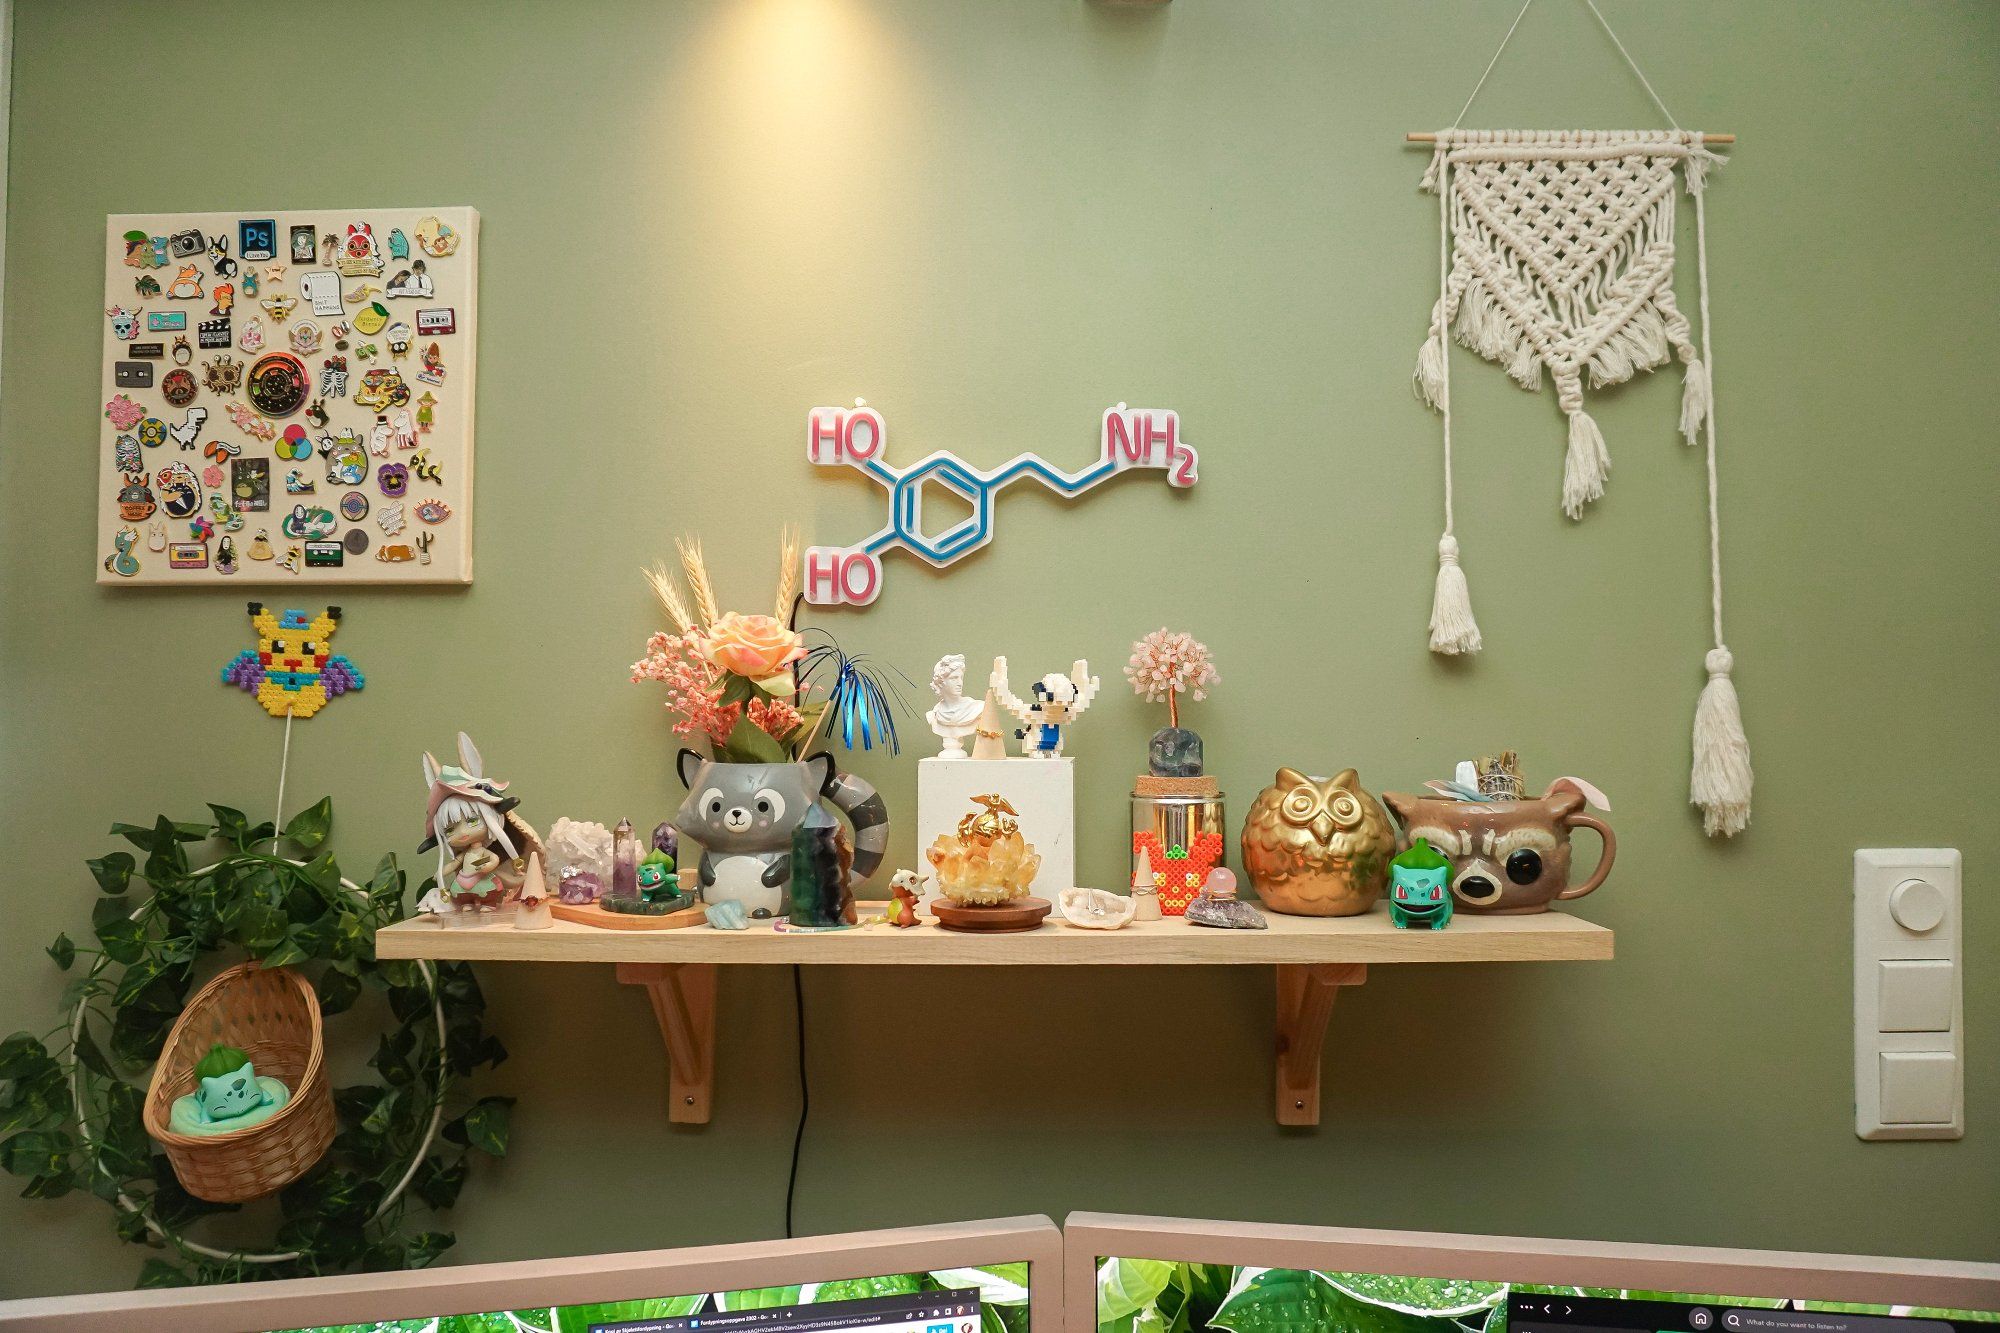 A wooden shelf on the wall with figurines, flowers, souvenirs, seashells, and other knick-knacks